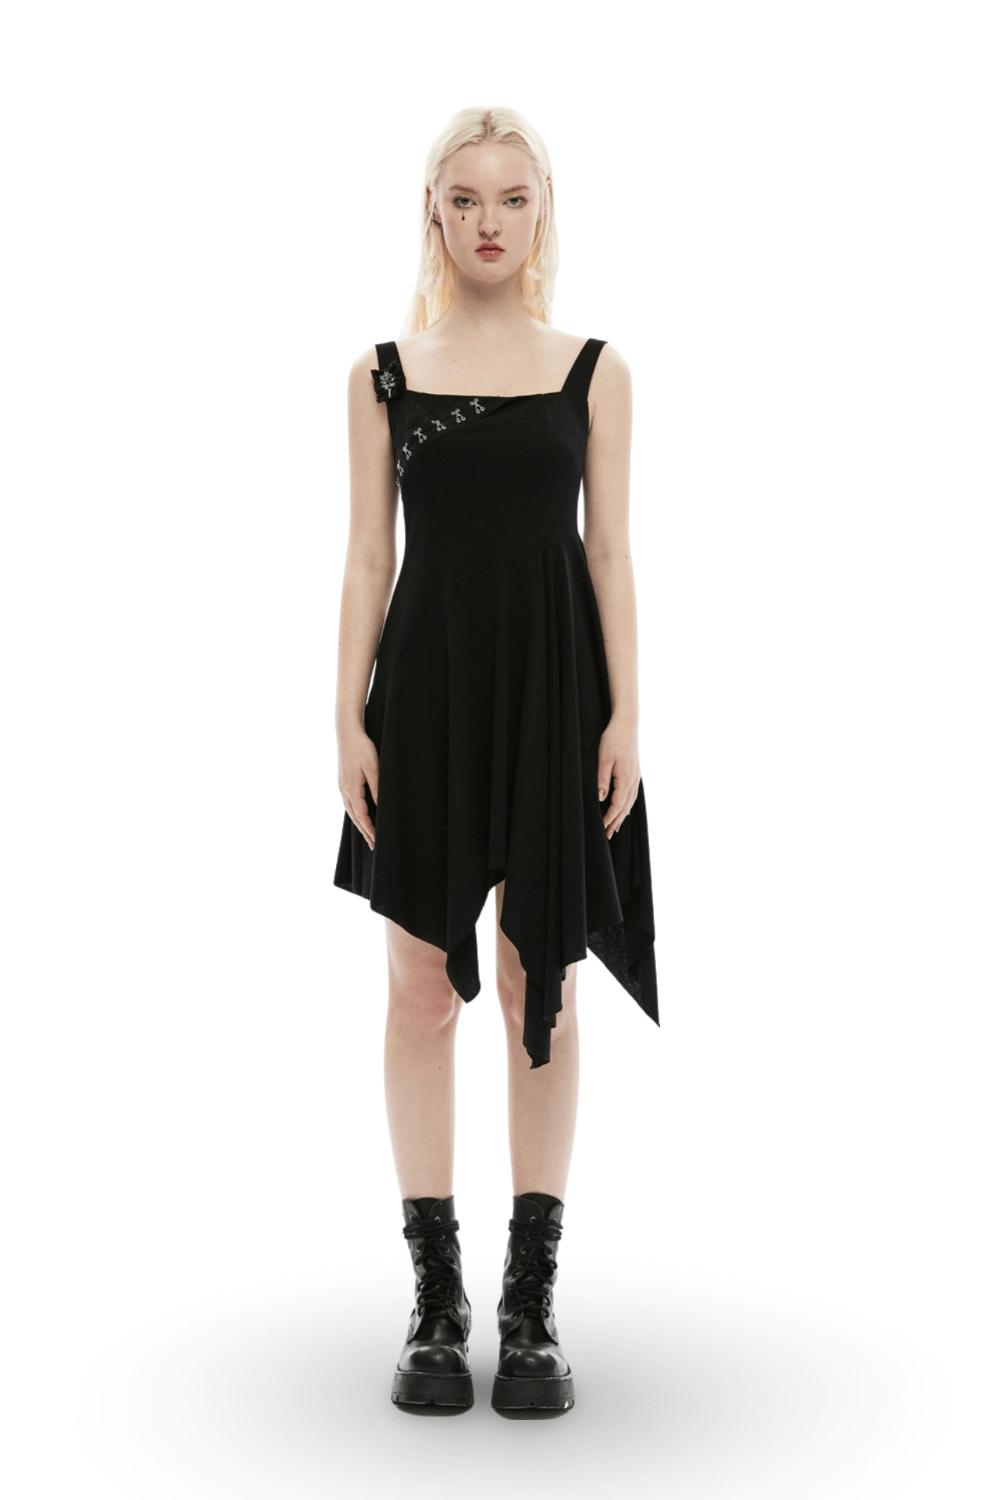 Edgy Asymmetrical Black Dress with Brooch Detail